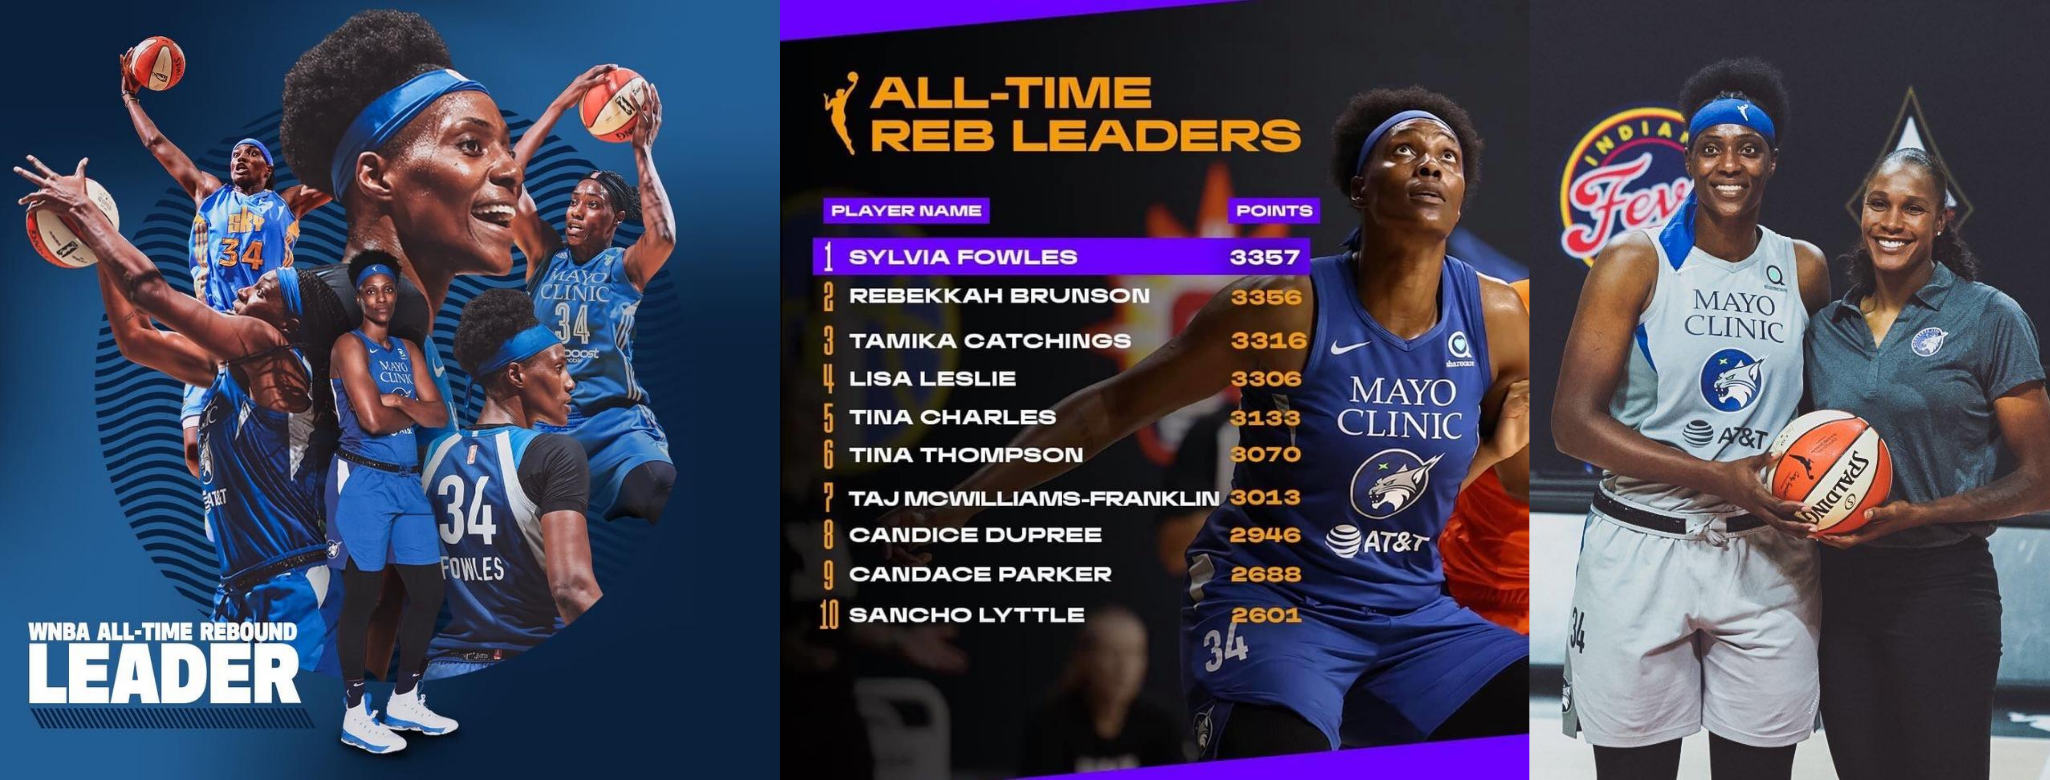 Minnesota center Sylvia Fowles becomes WNBA’s all-time leading rebounder